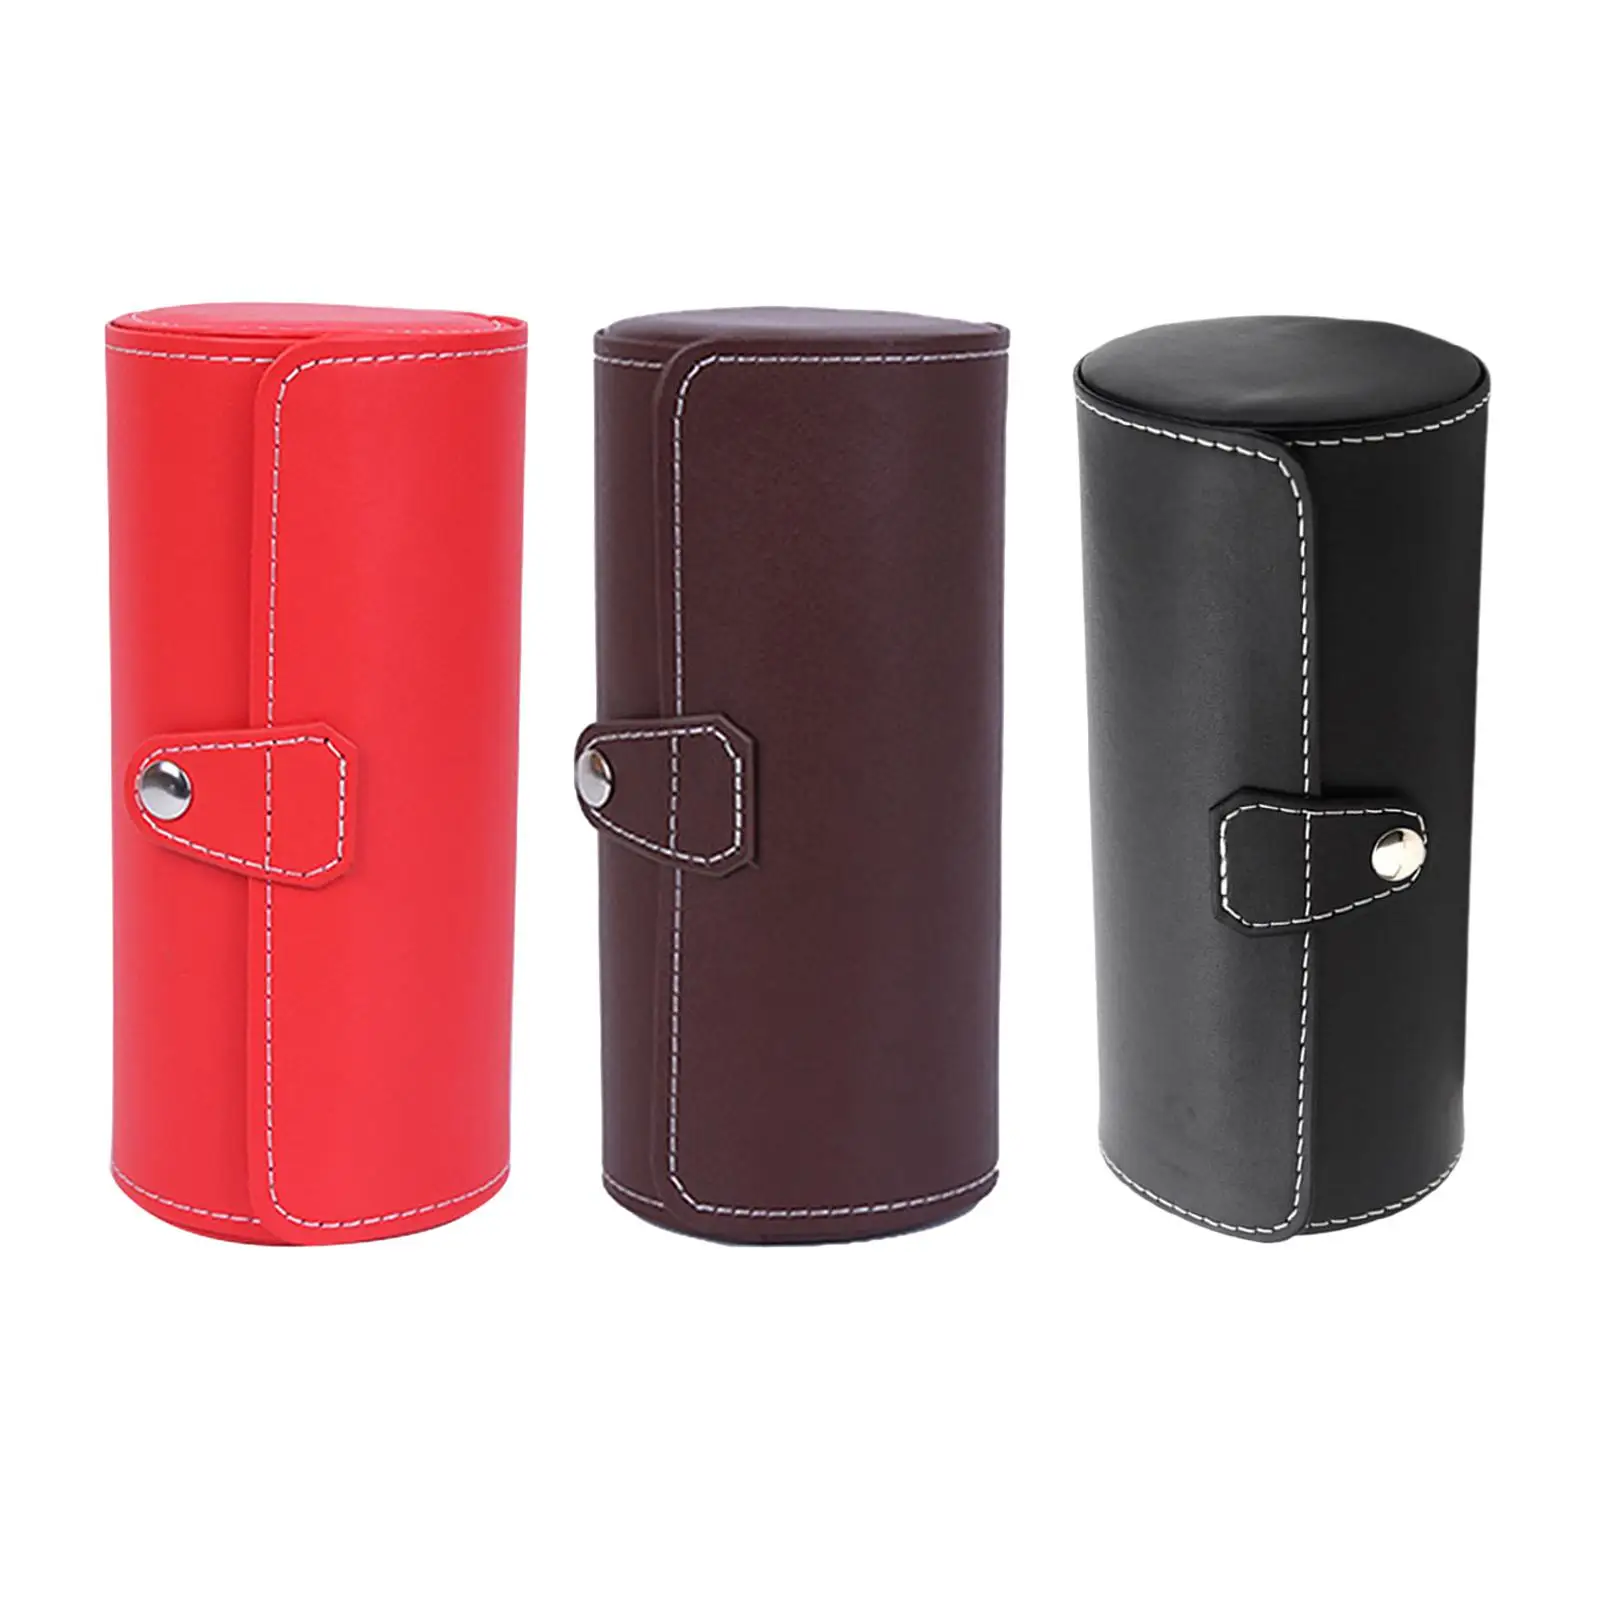 Watch 2 Slots Wristwatch Jewelry Cylinder for Personal Use Display Case